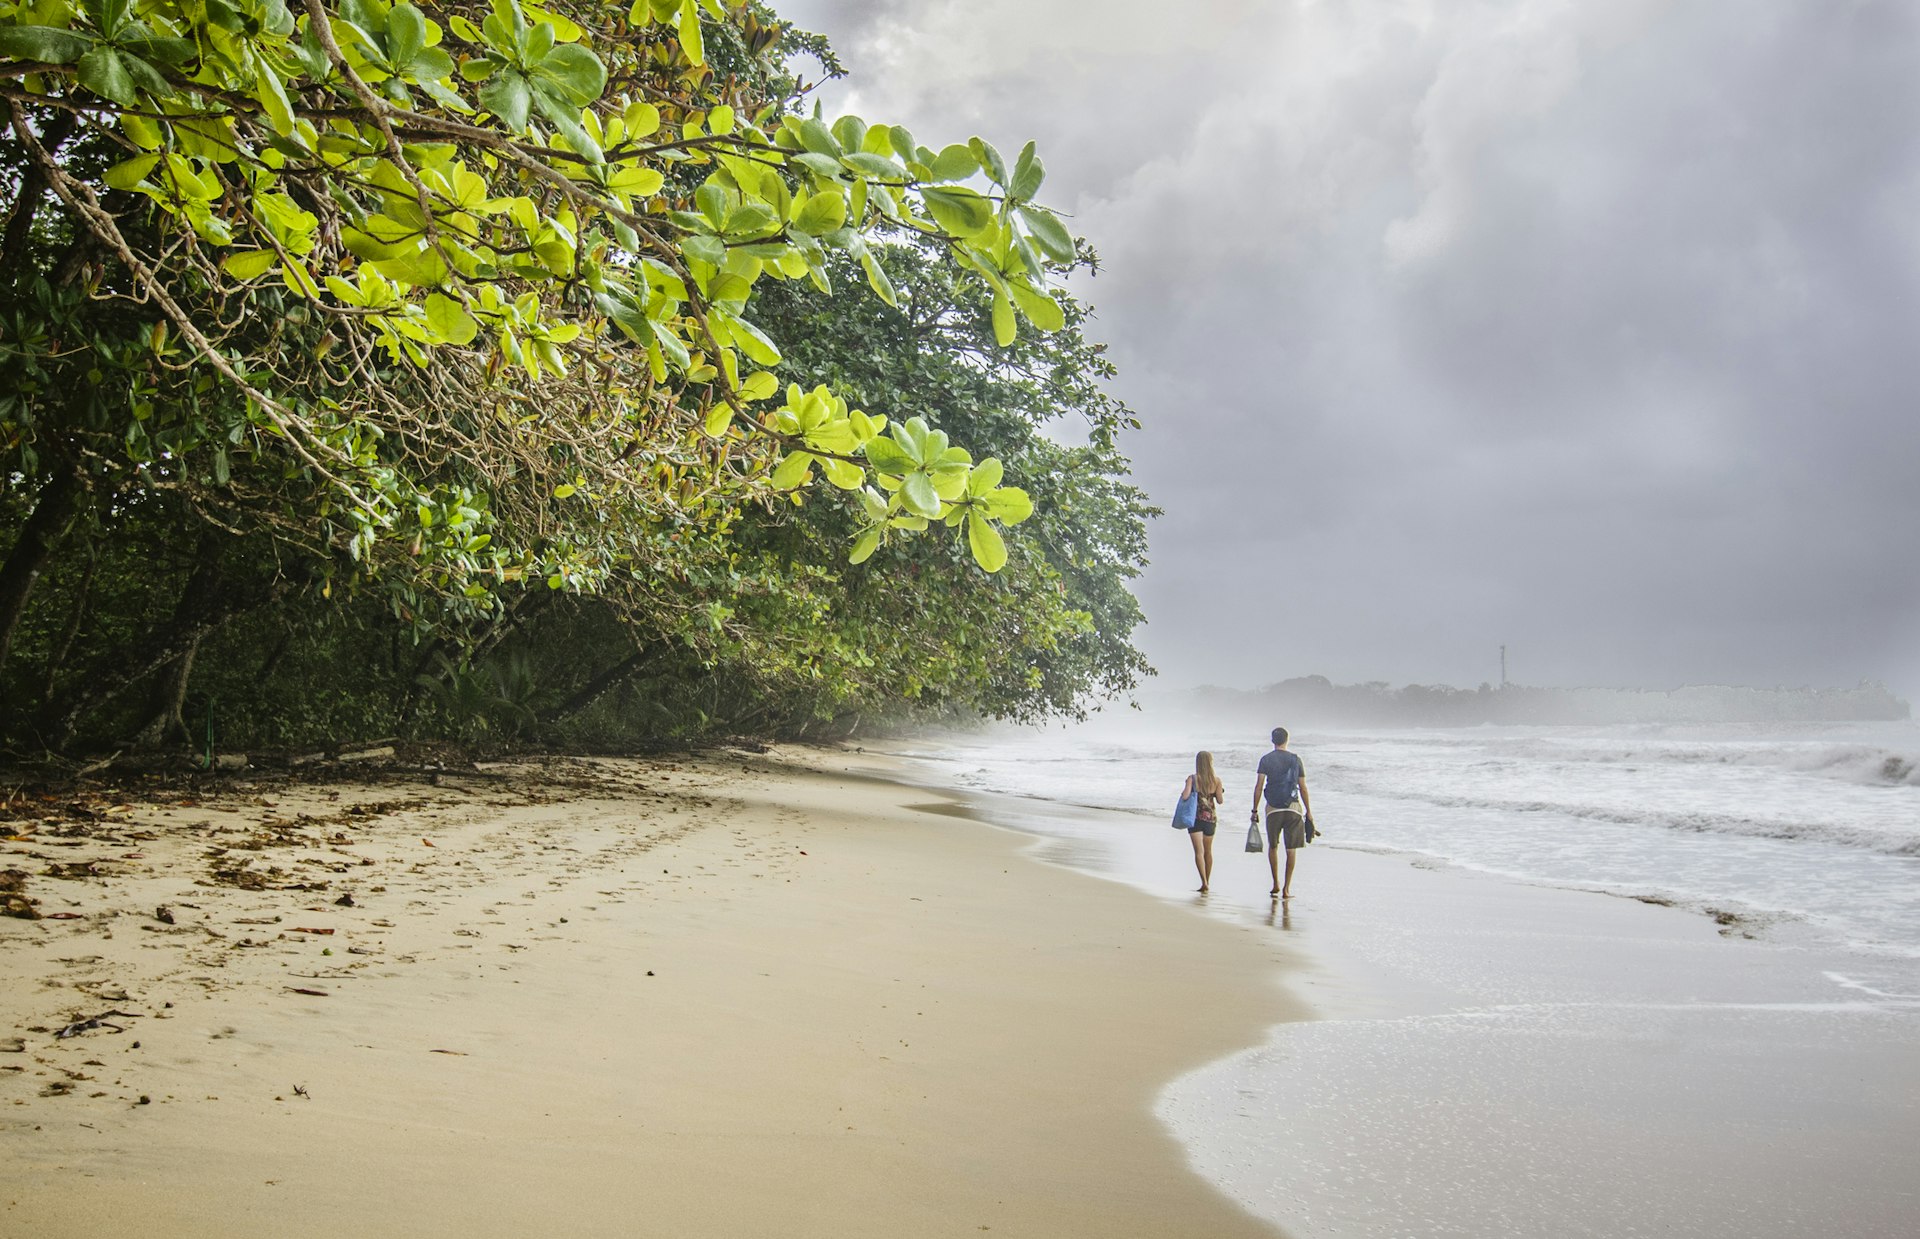 Two people are walking along a sandy beach on a stormy day